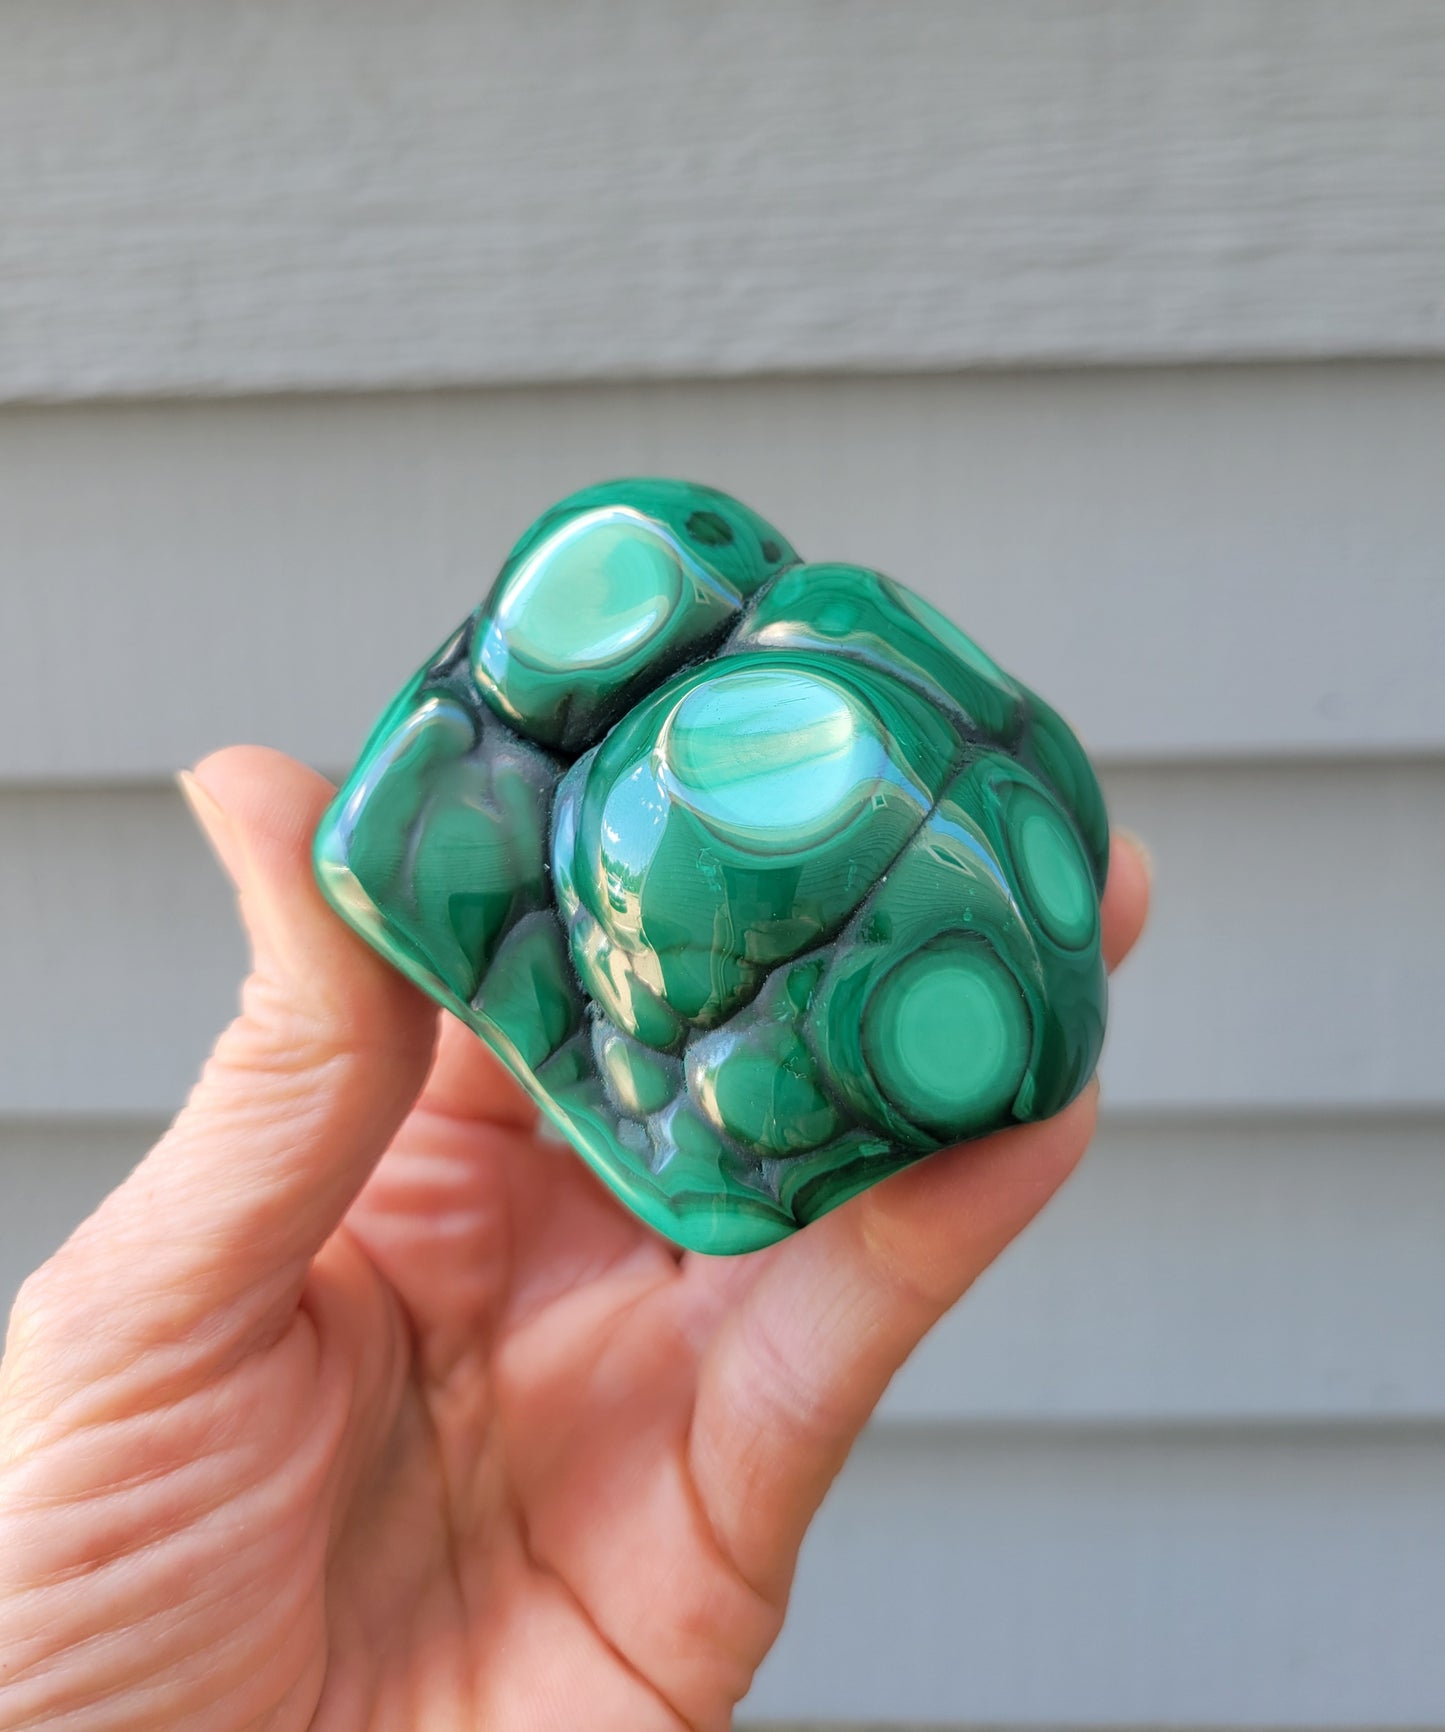 Malachite from DRC